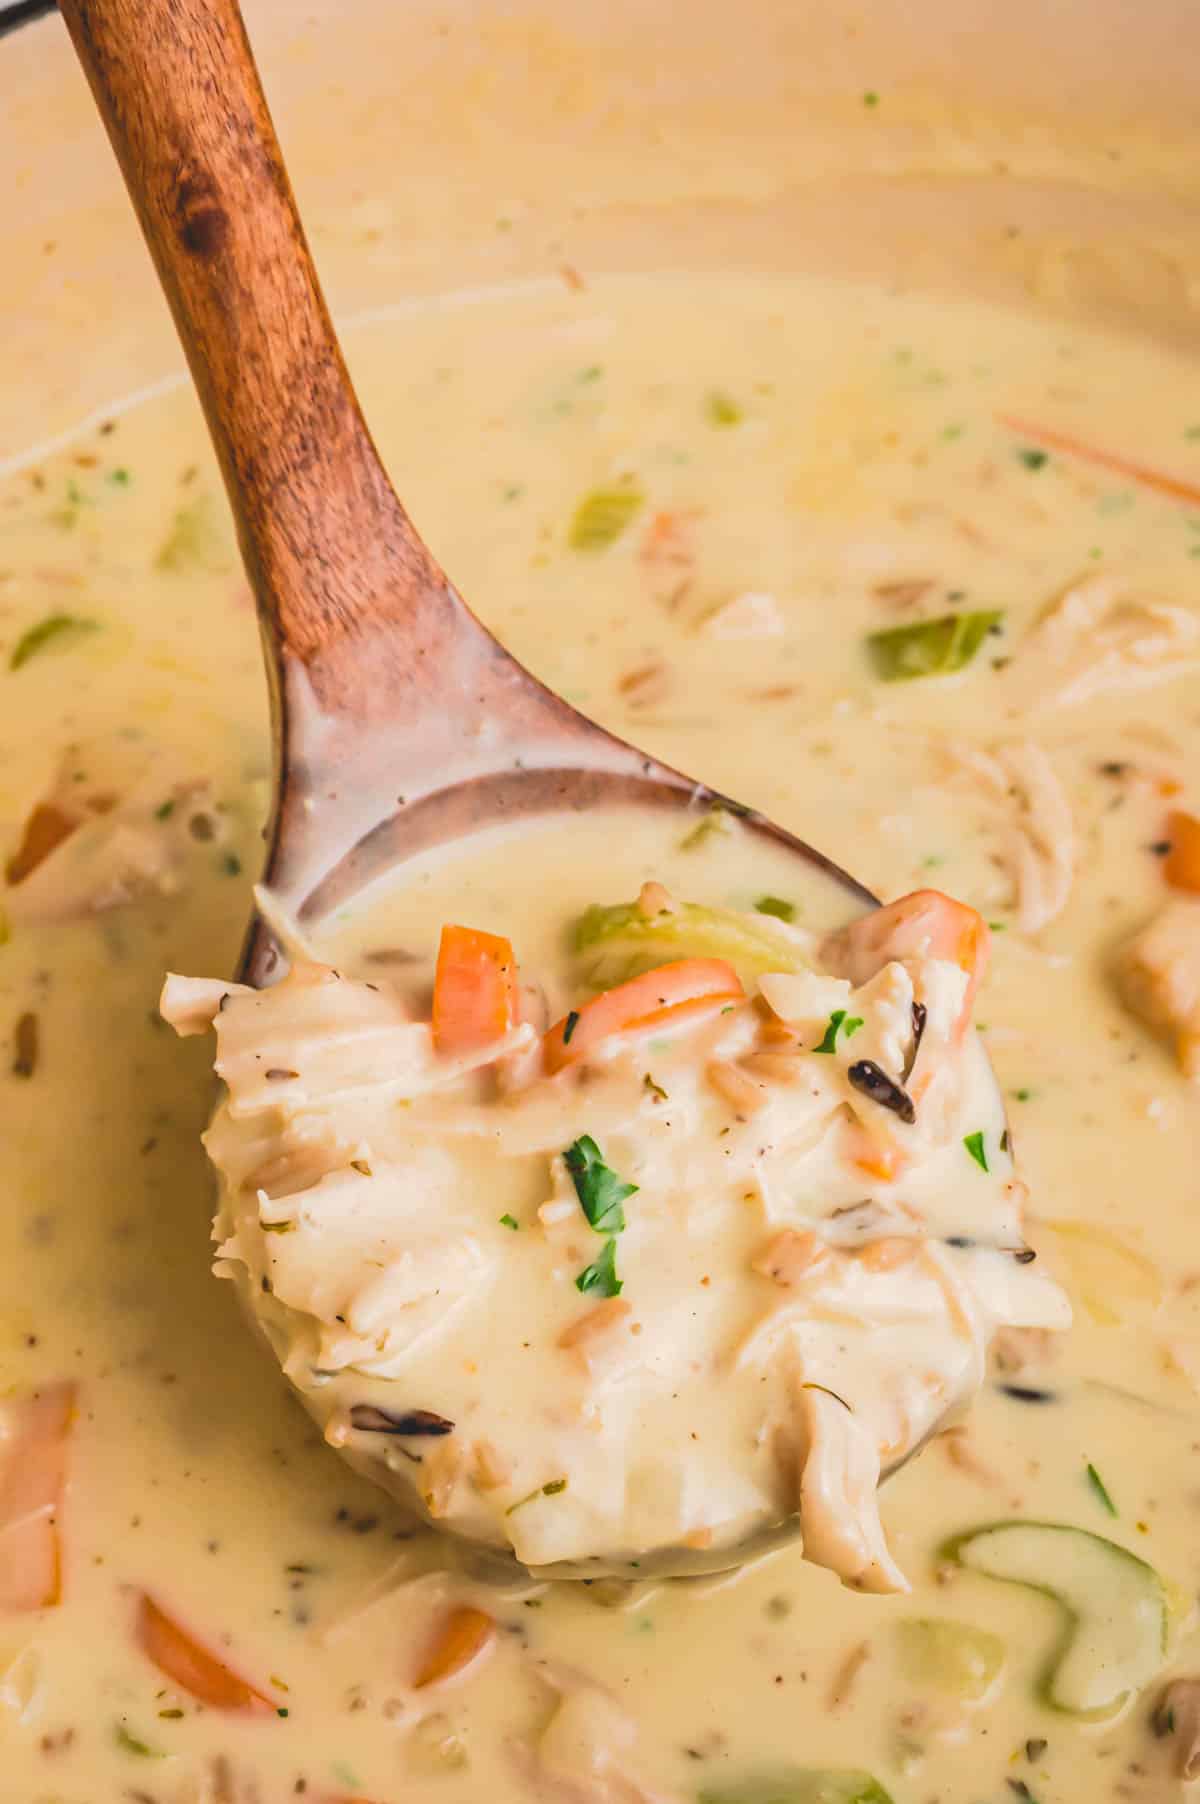 Creamy turkey and rice soup scooped in a wooden paddle.